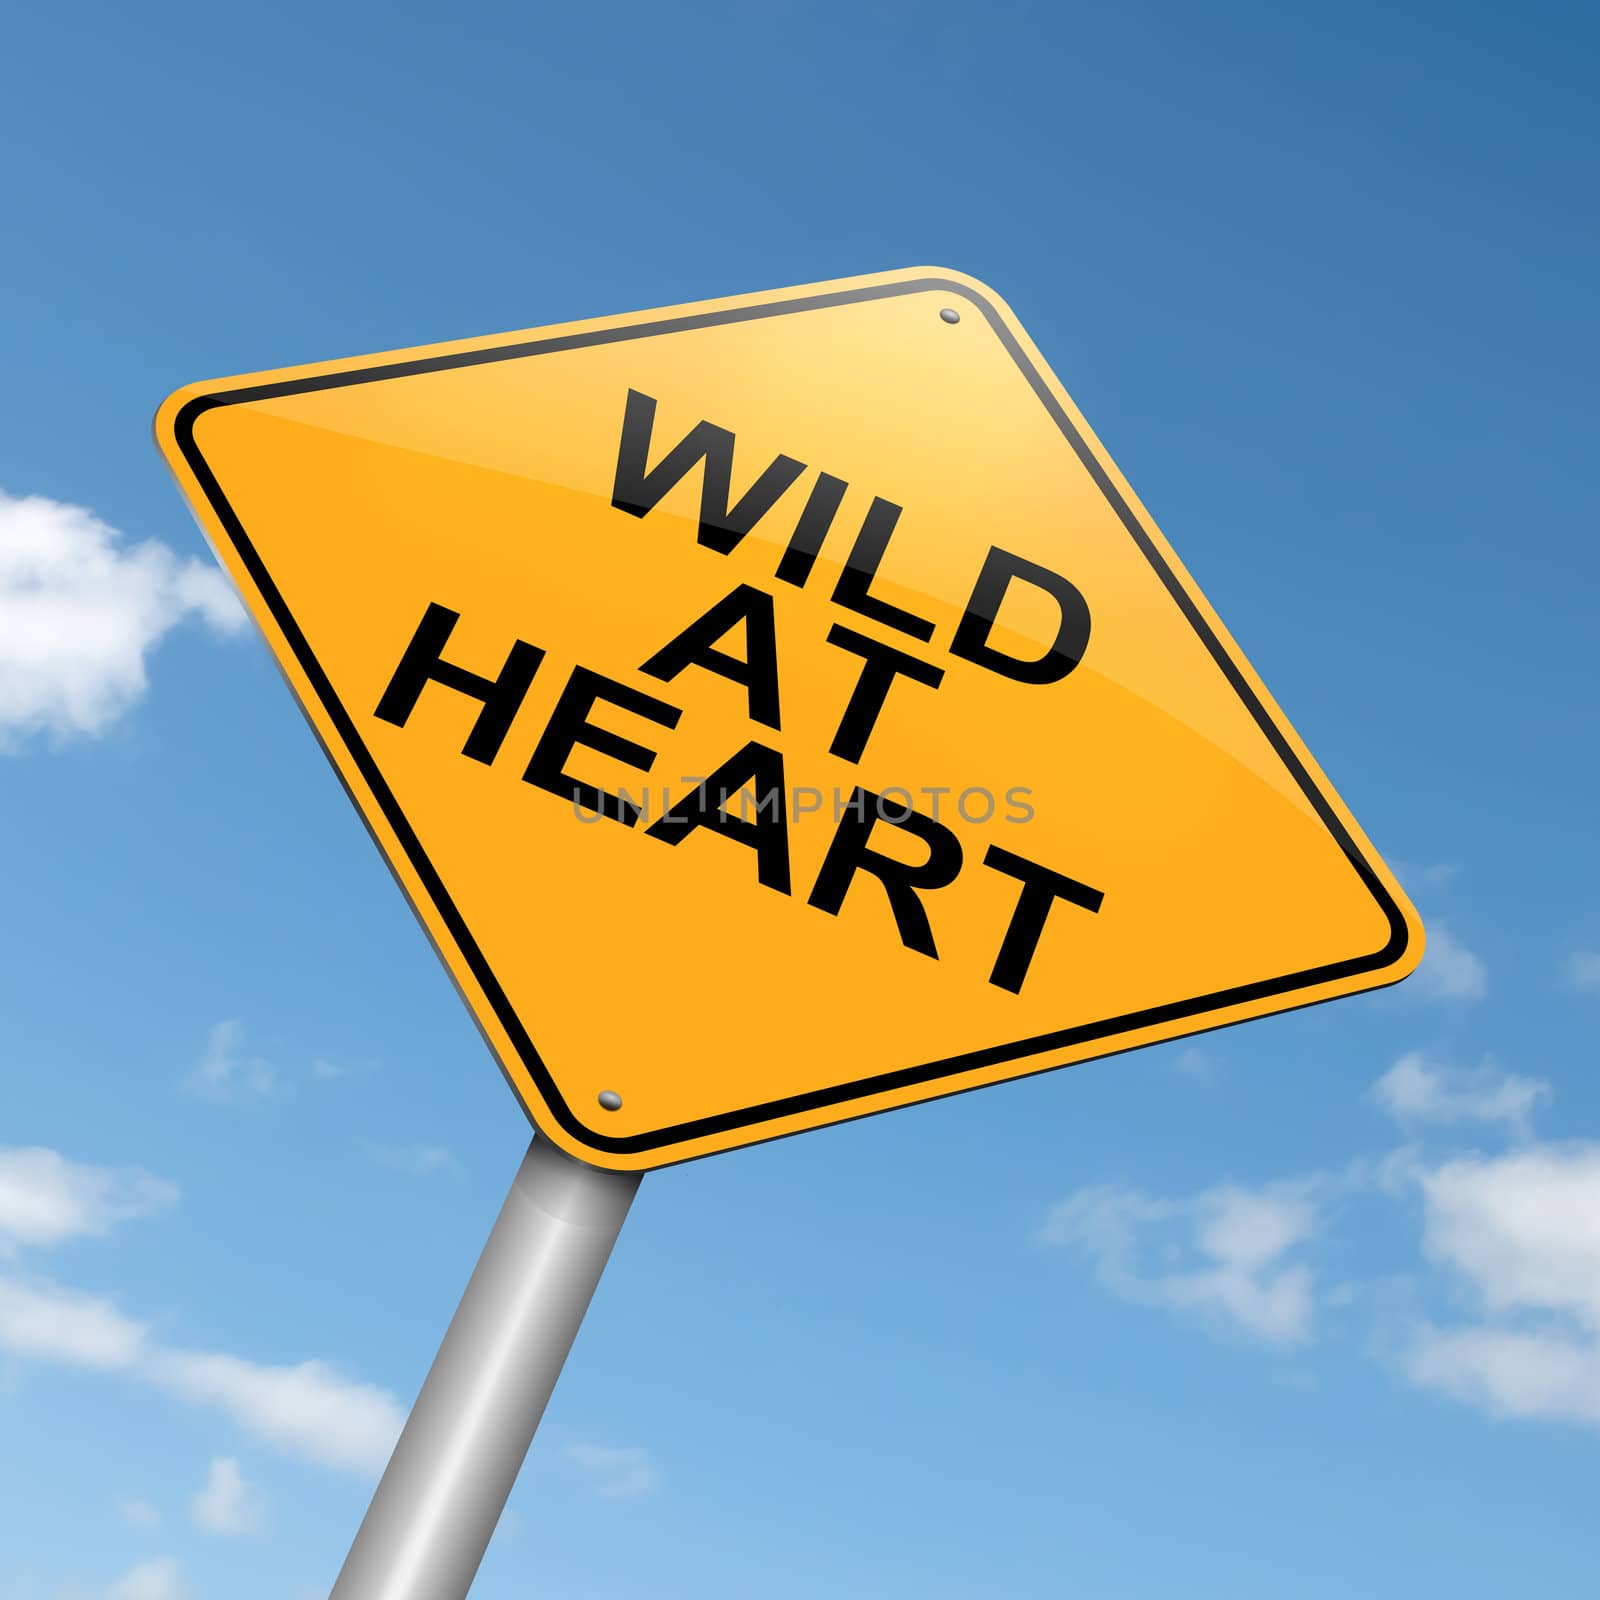 Wild at heart. by 72soul